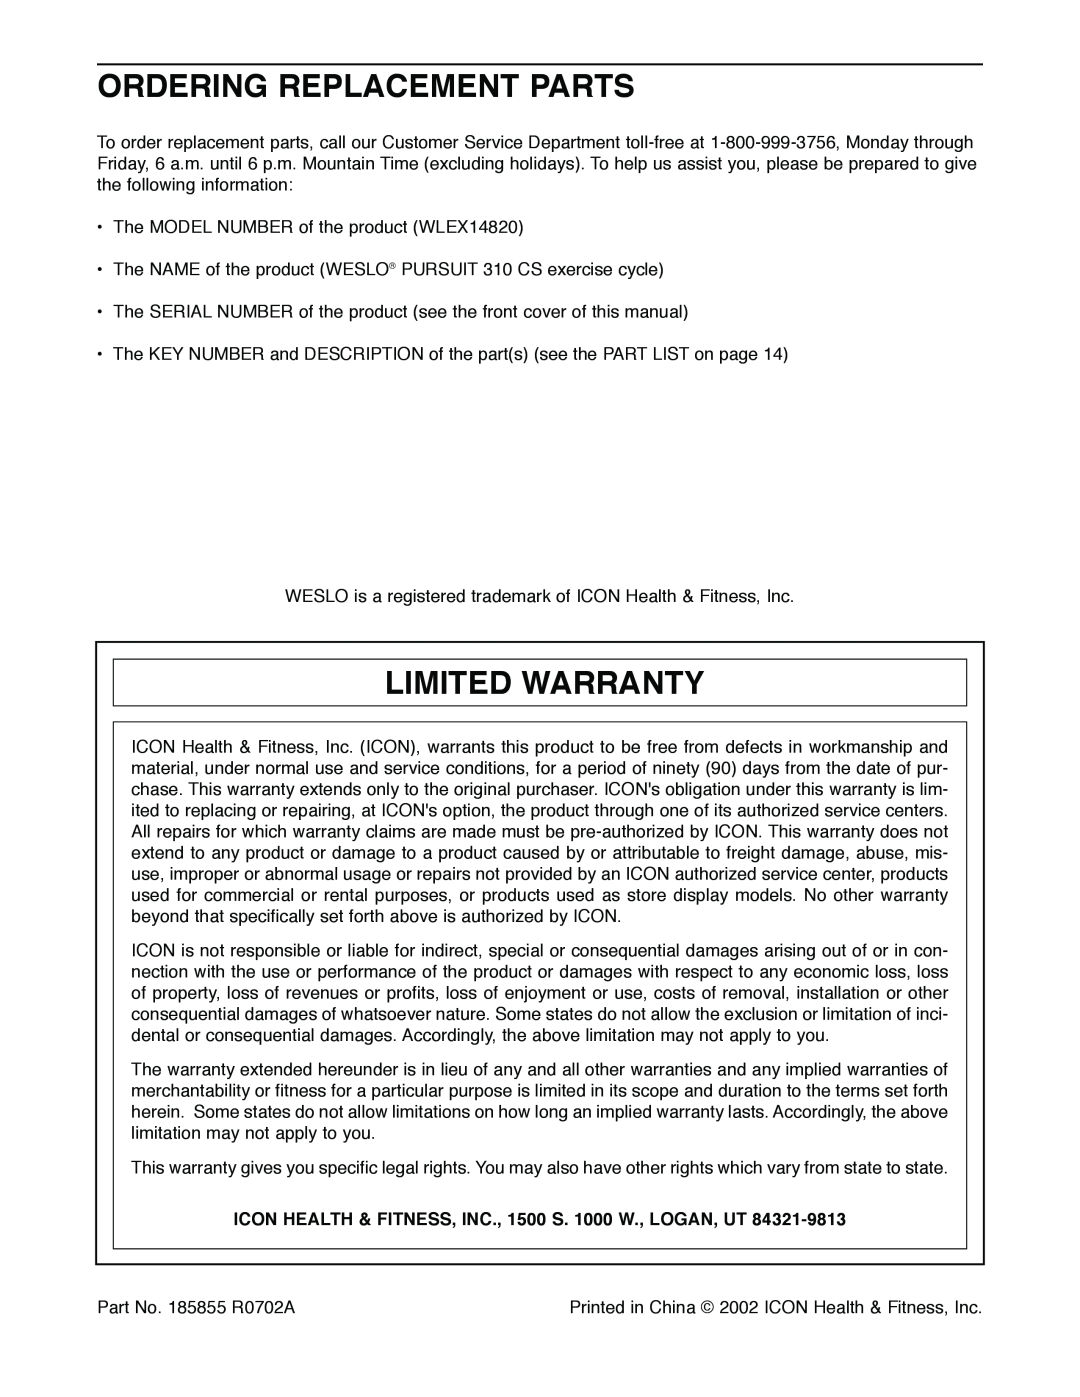 Weslo WLEX14820 Ordering Replacement Parts, Limited Warranty, ICON HEALTH & FITNESS, INC., 1500 S. 1000 W., LOGAN, UT 